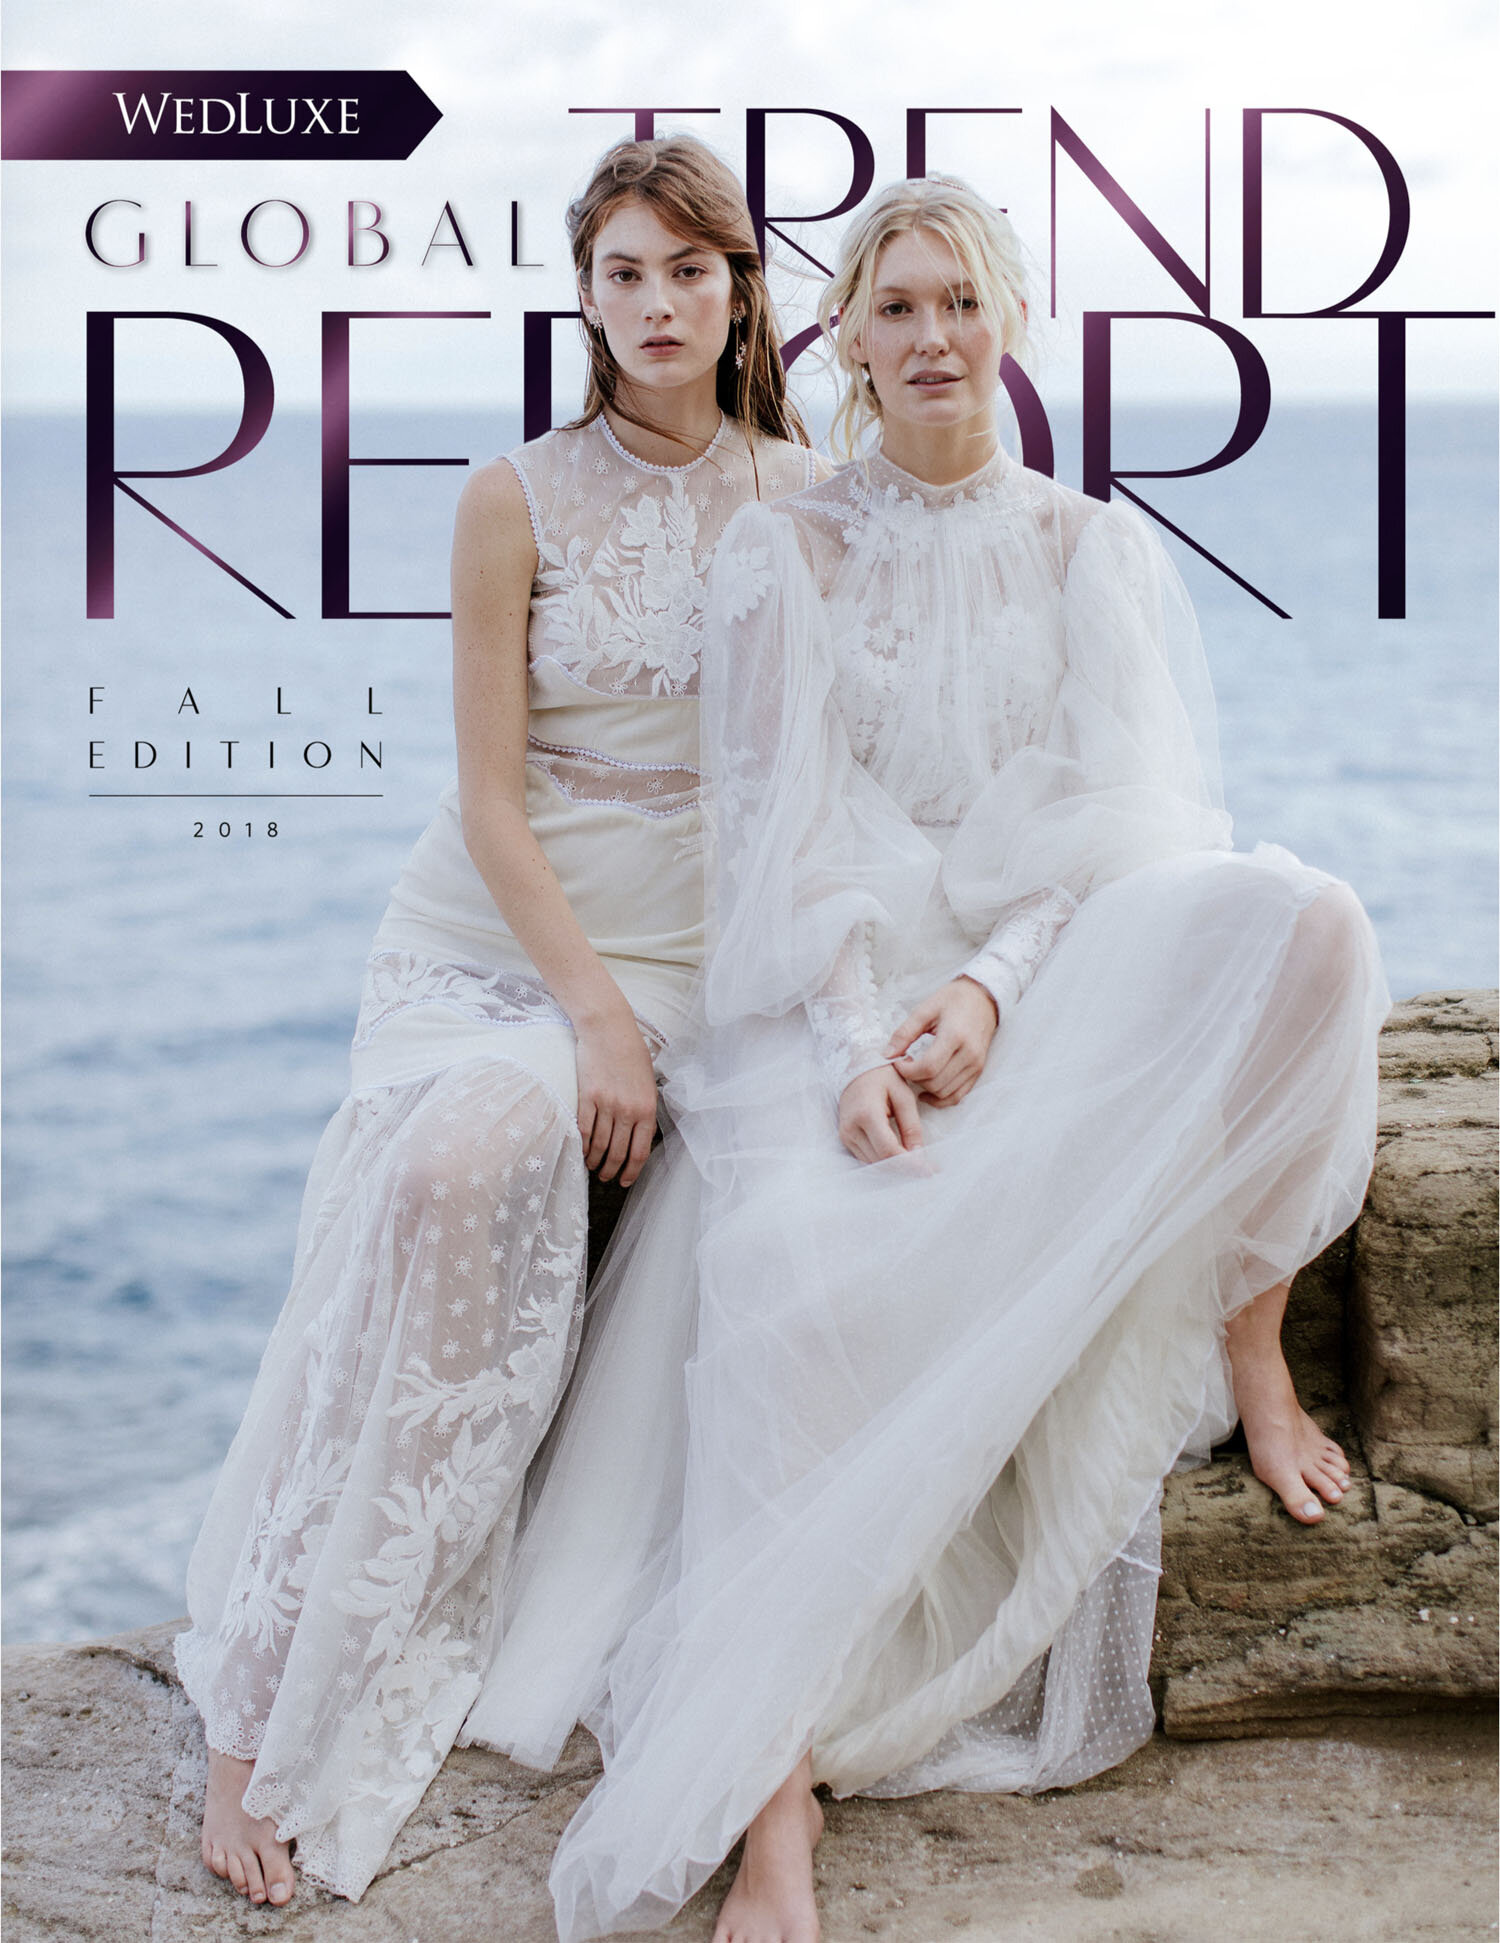 WEDLUXE GLOBAL TREND REPORT COVER